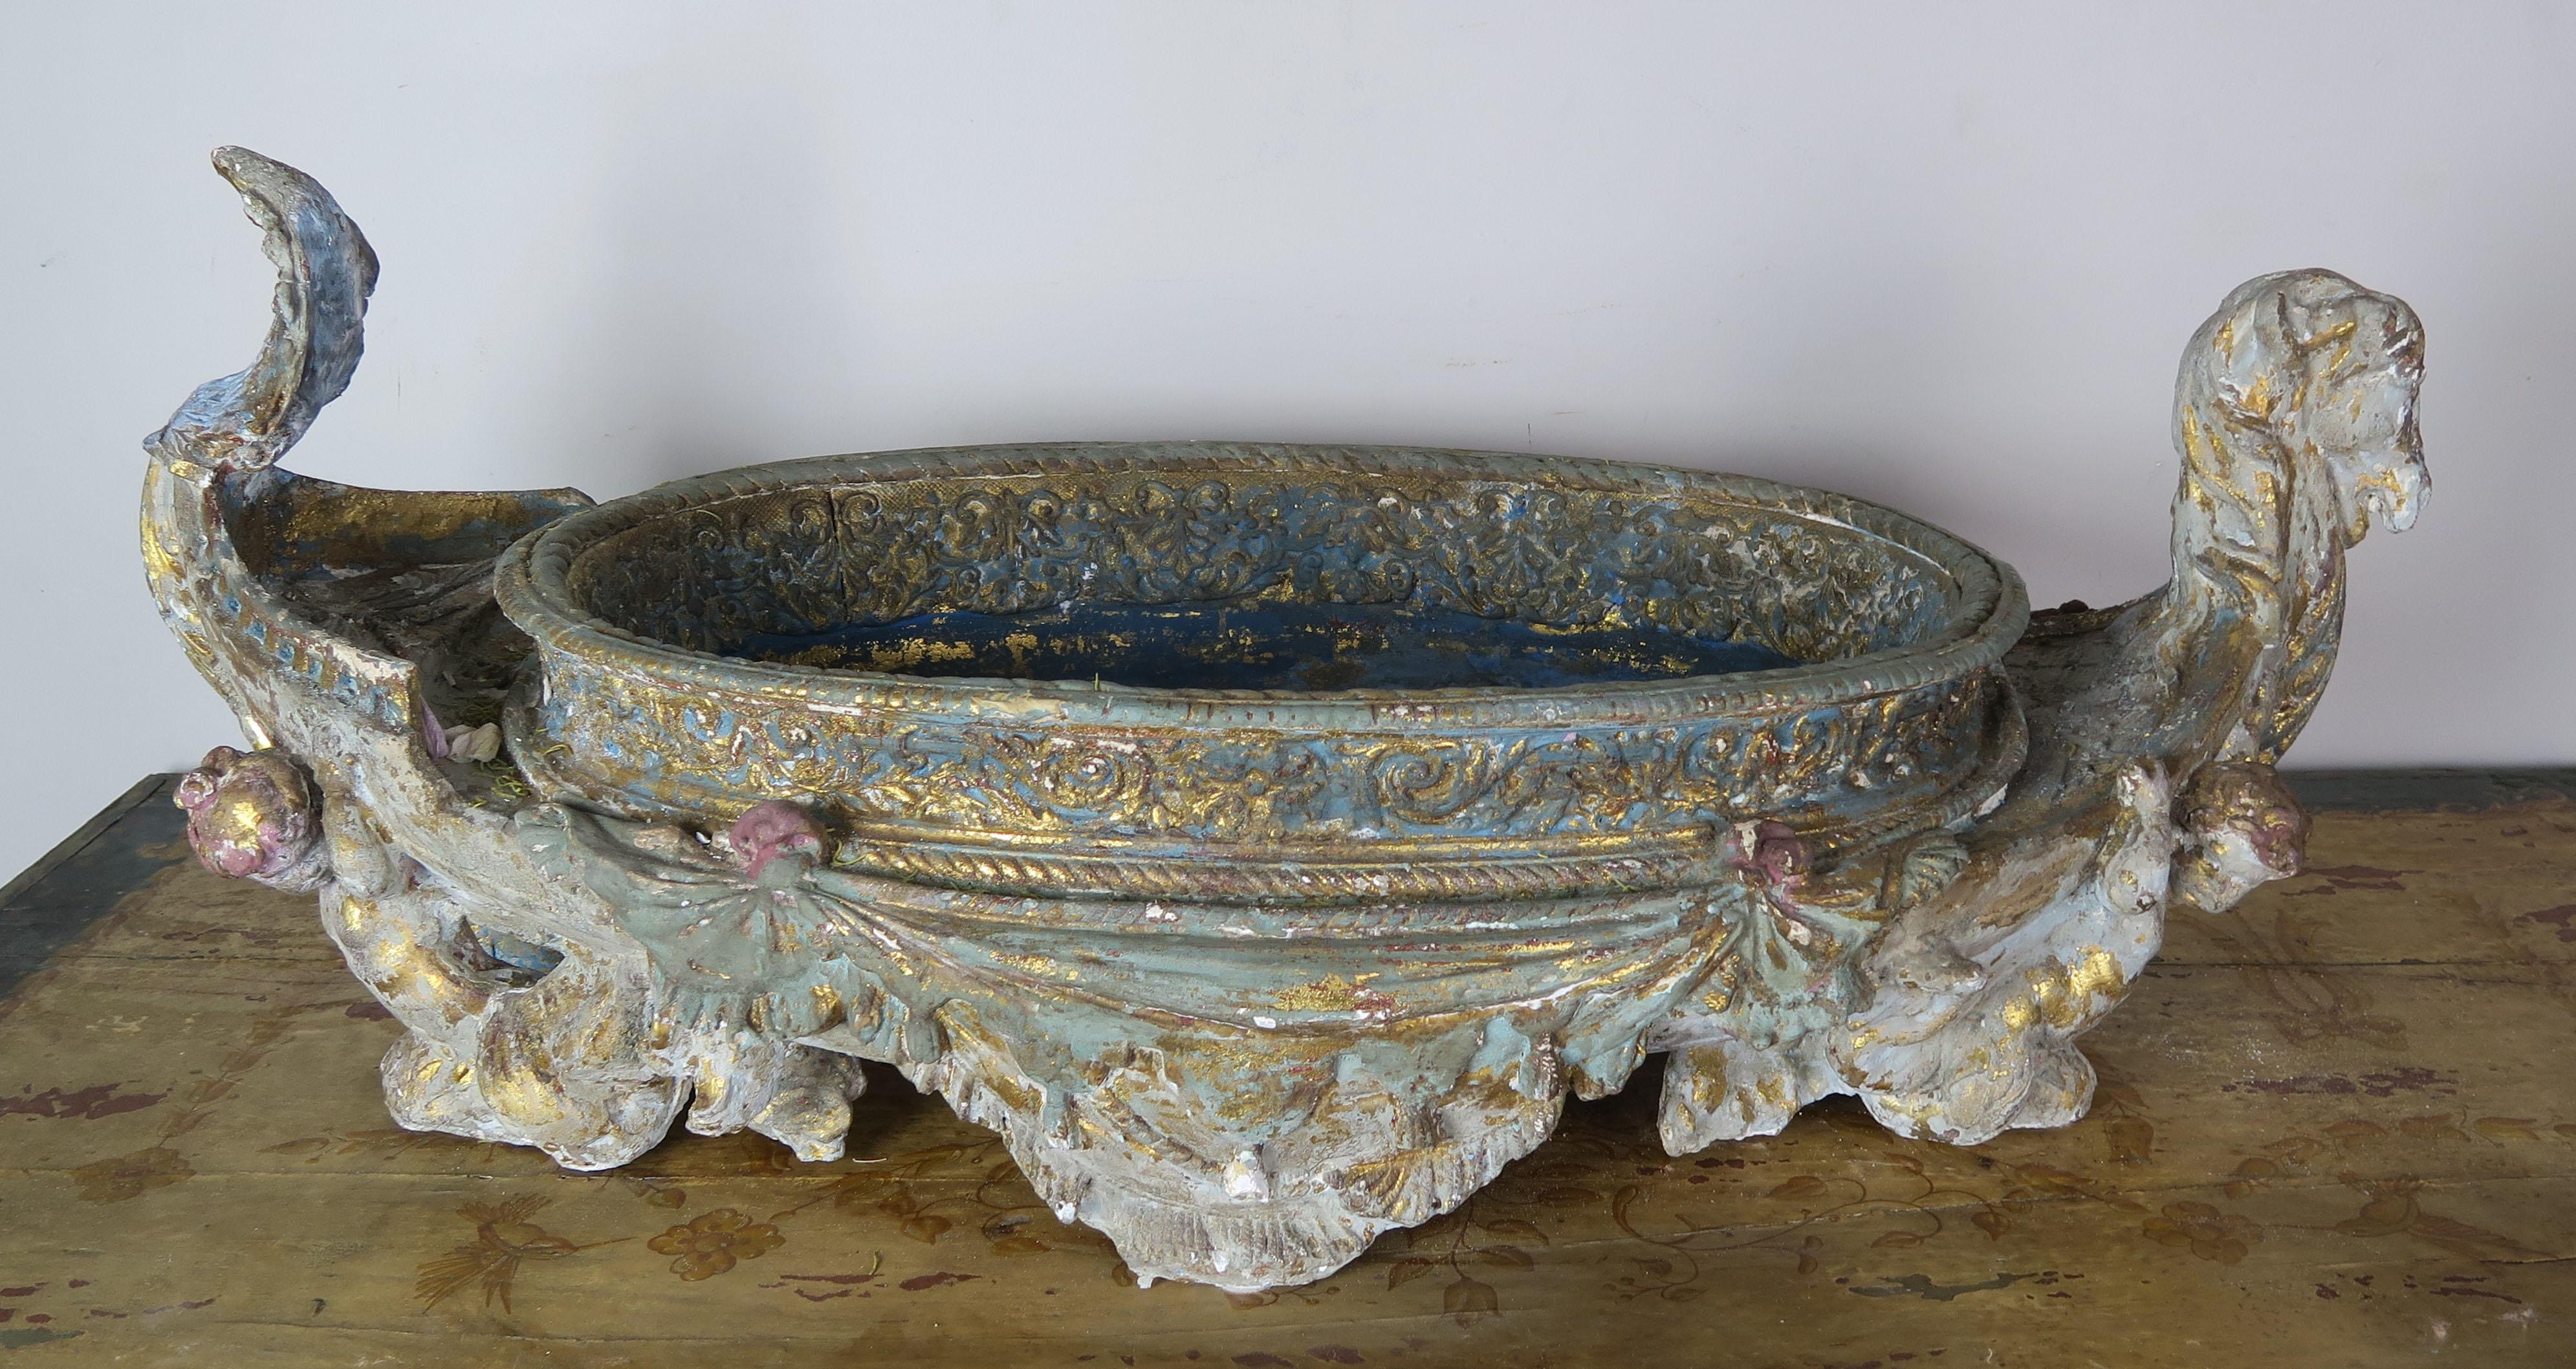 Large Venetian painted gondola shaped jardiniere with gold leaf highlights throughout. This vessel is painted in soft shades of blue, green, gray, pink and antique white mixed with accents of gold leaf. This piece is absolutely beautiful filled with